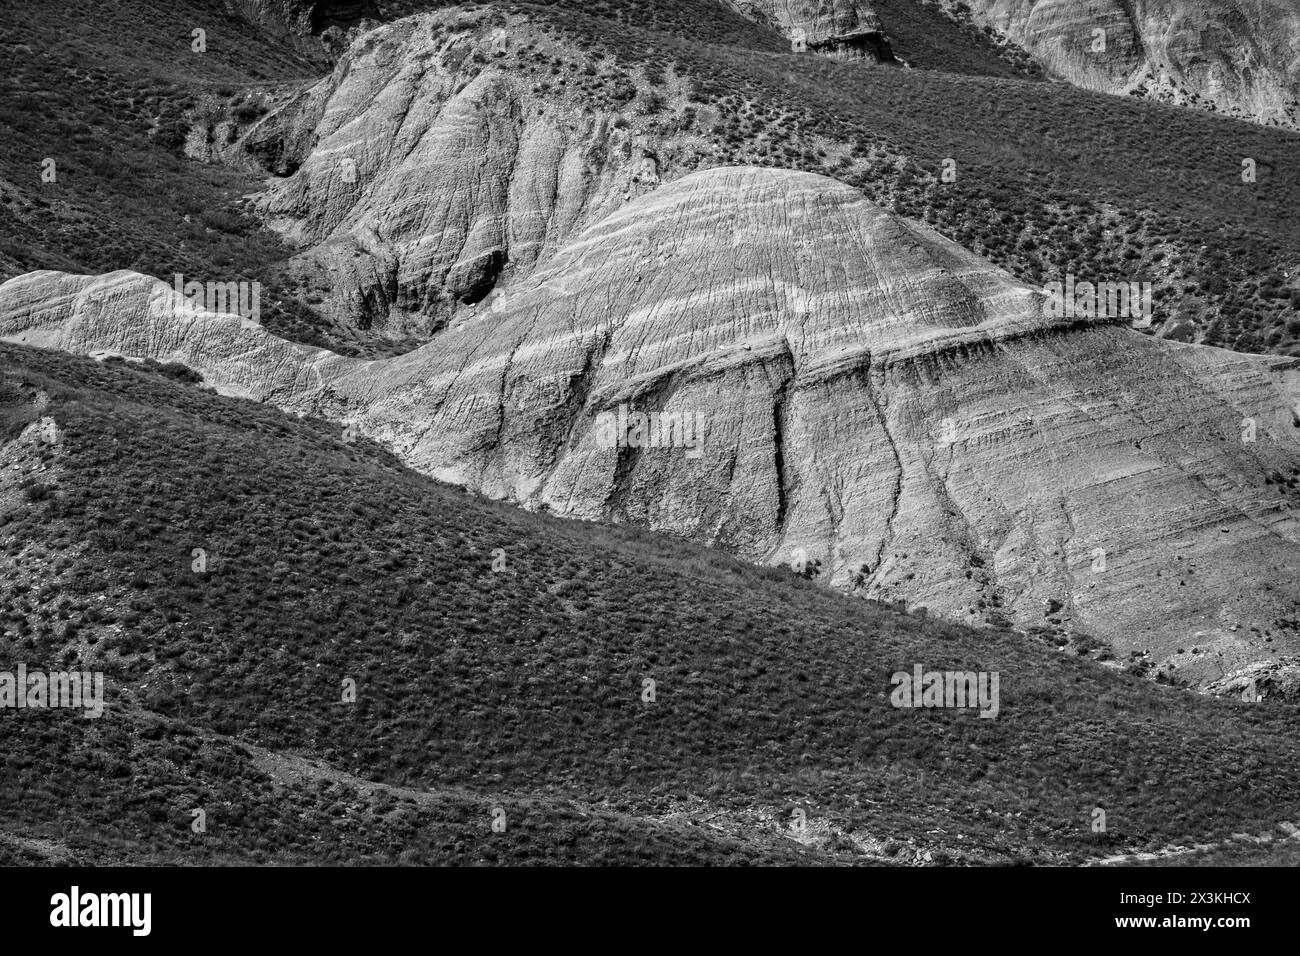 Striking black and white photo capturing the detailed textures and dramatic contours of barren hills. The image evokes a sense of solitude and rugged beauty. Stock Photo